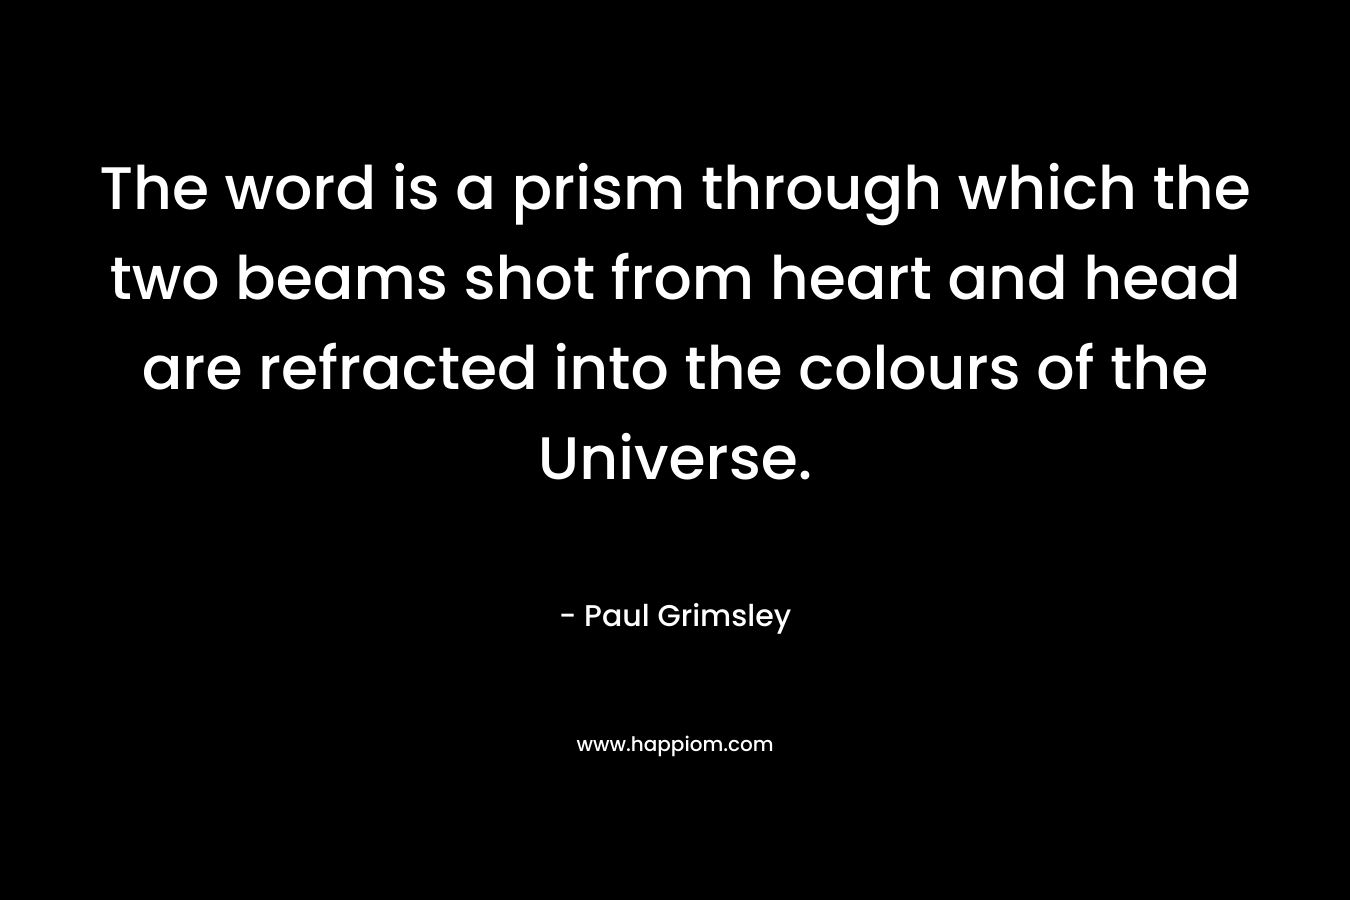 The word is a prism through which the two beams shot from heart and head are refracted into the colours of the Universe. – Paul Grimsley